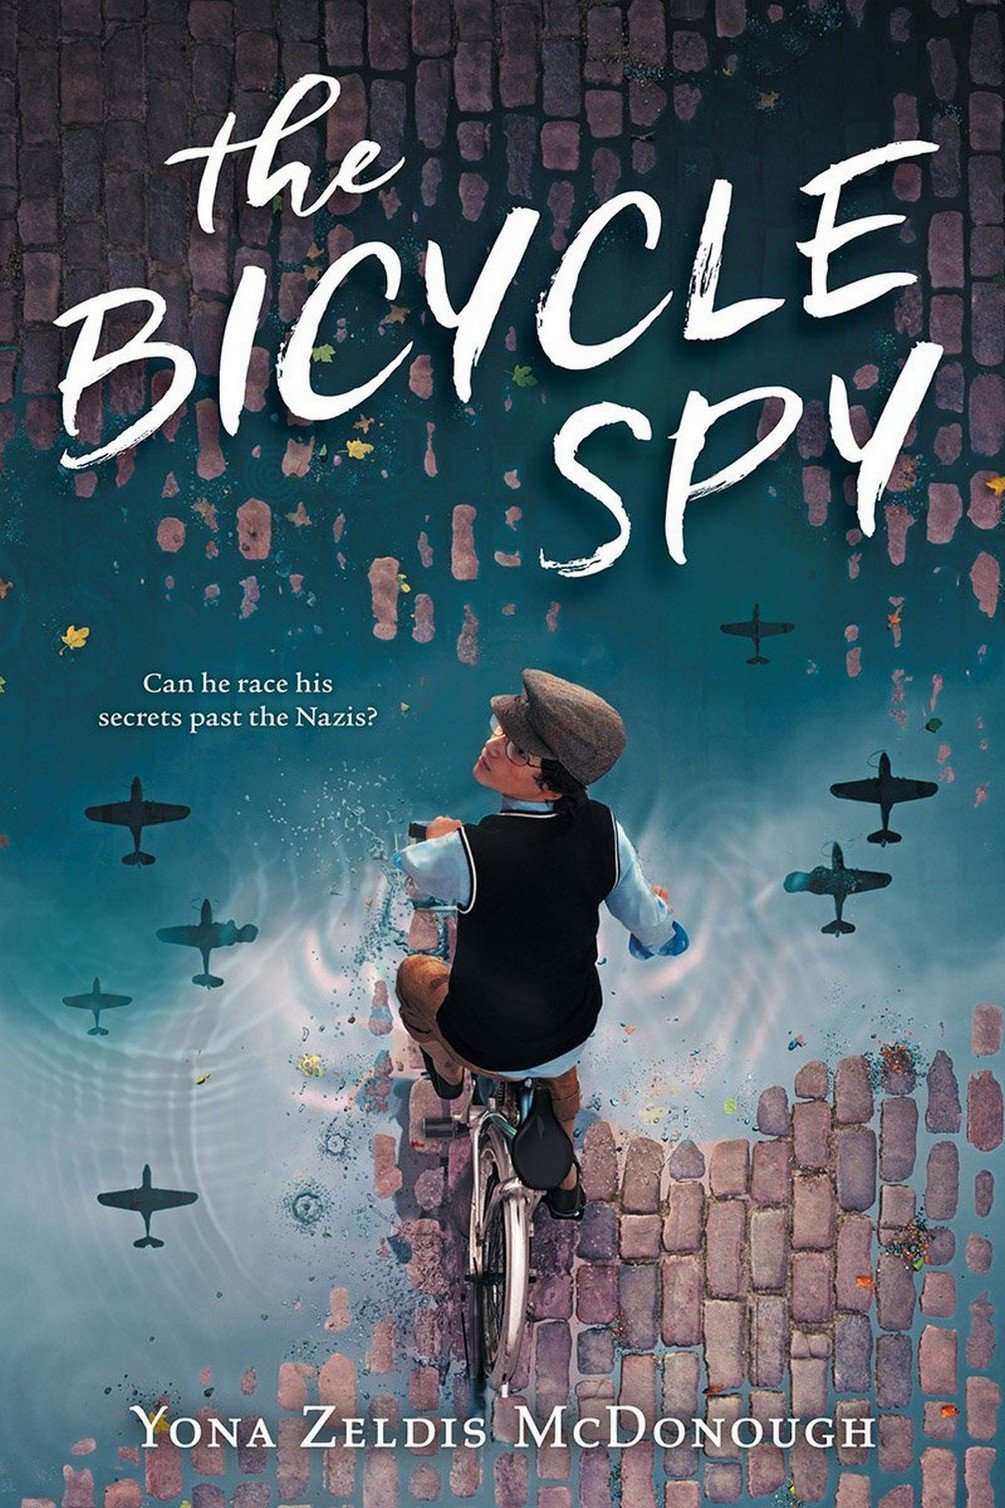 Cover of The Bicycle Spy, with a boy on a bicycle riding on a wet cobblestone street. Warplanes are reflected in the puddles.